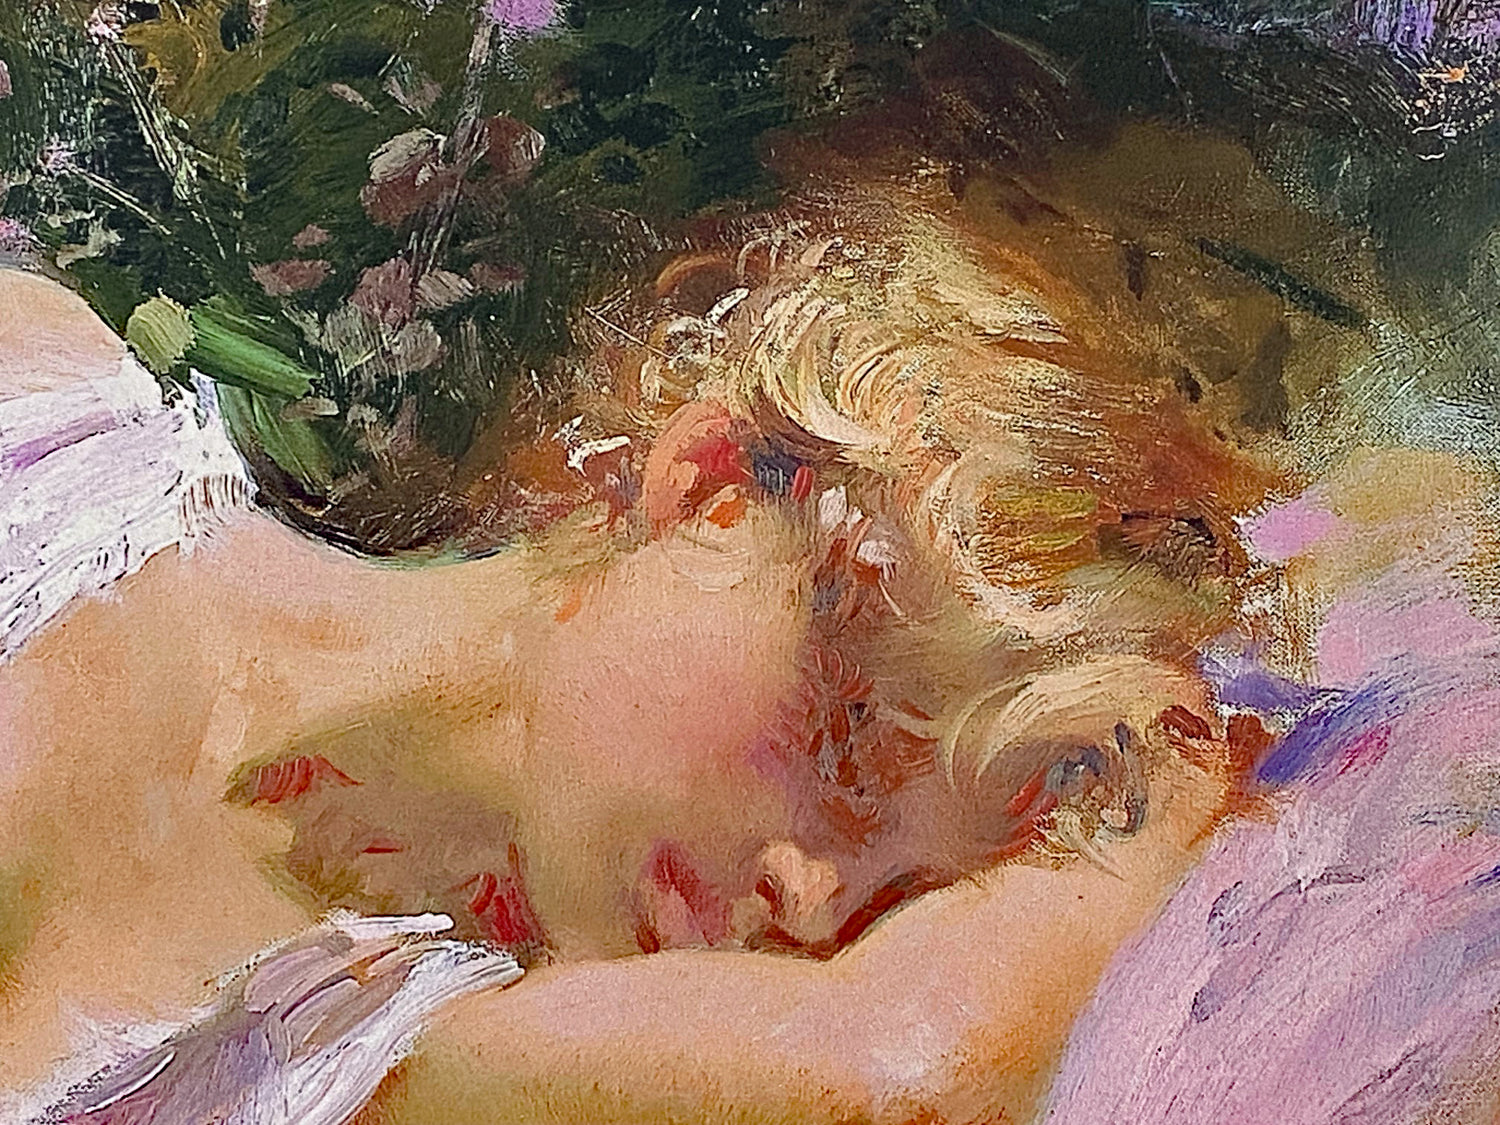 Day Dream Pino Daeni Giclée Print Artist Hand Signed and Numbered